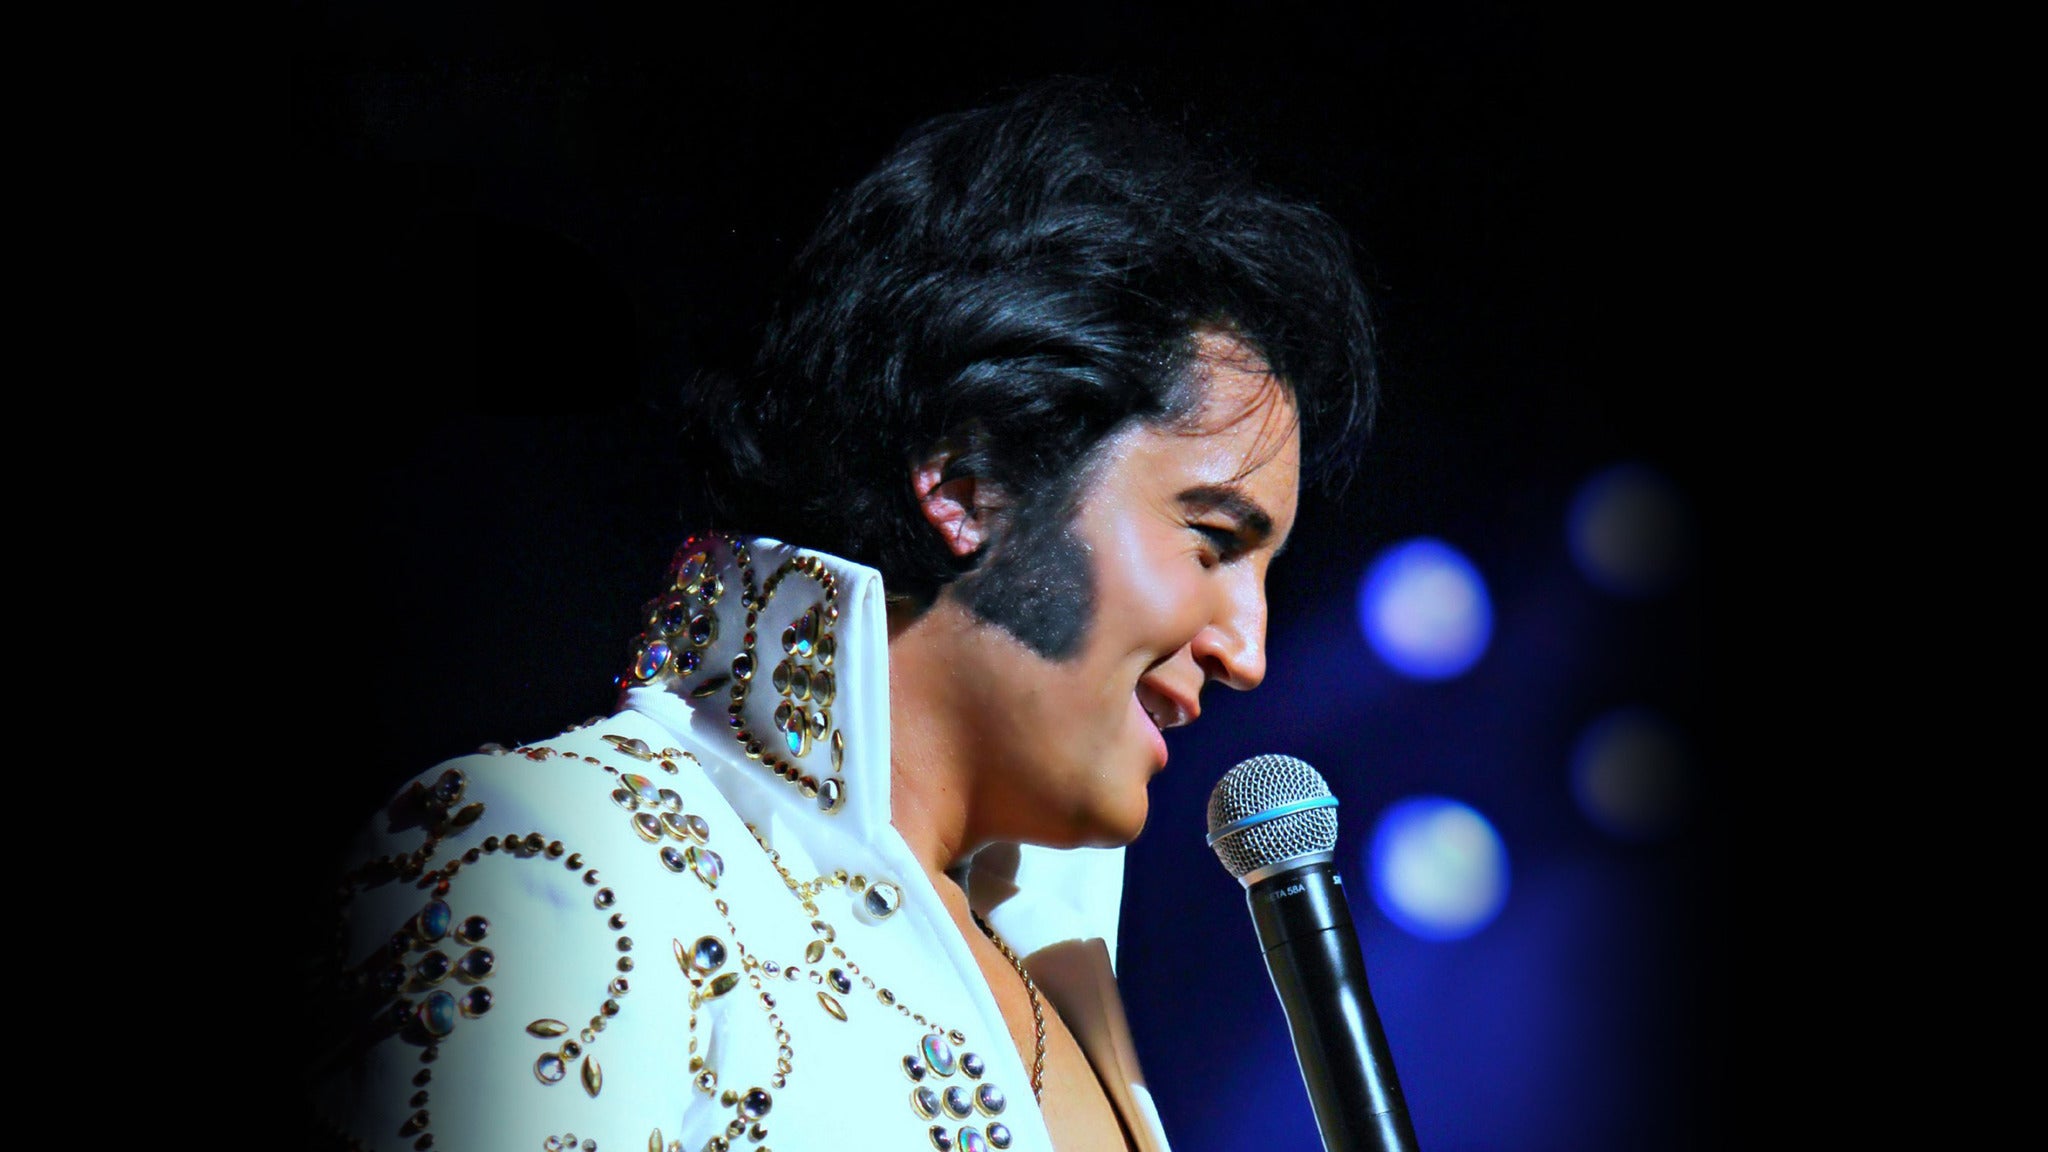 Image used with permission from Ticketmaster | Ben Portsmouth - This Is Elvis tickets